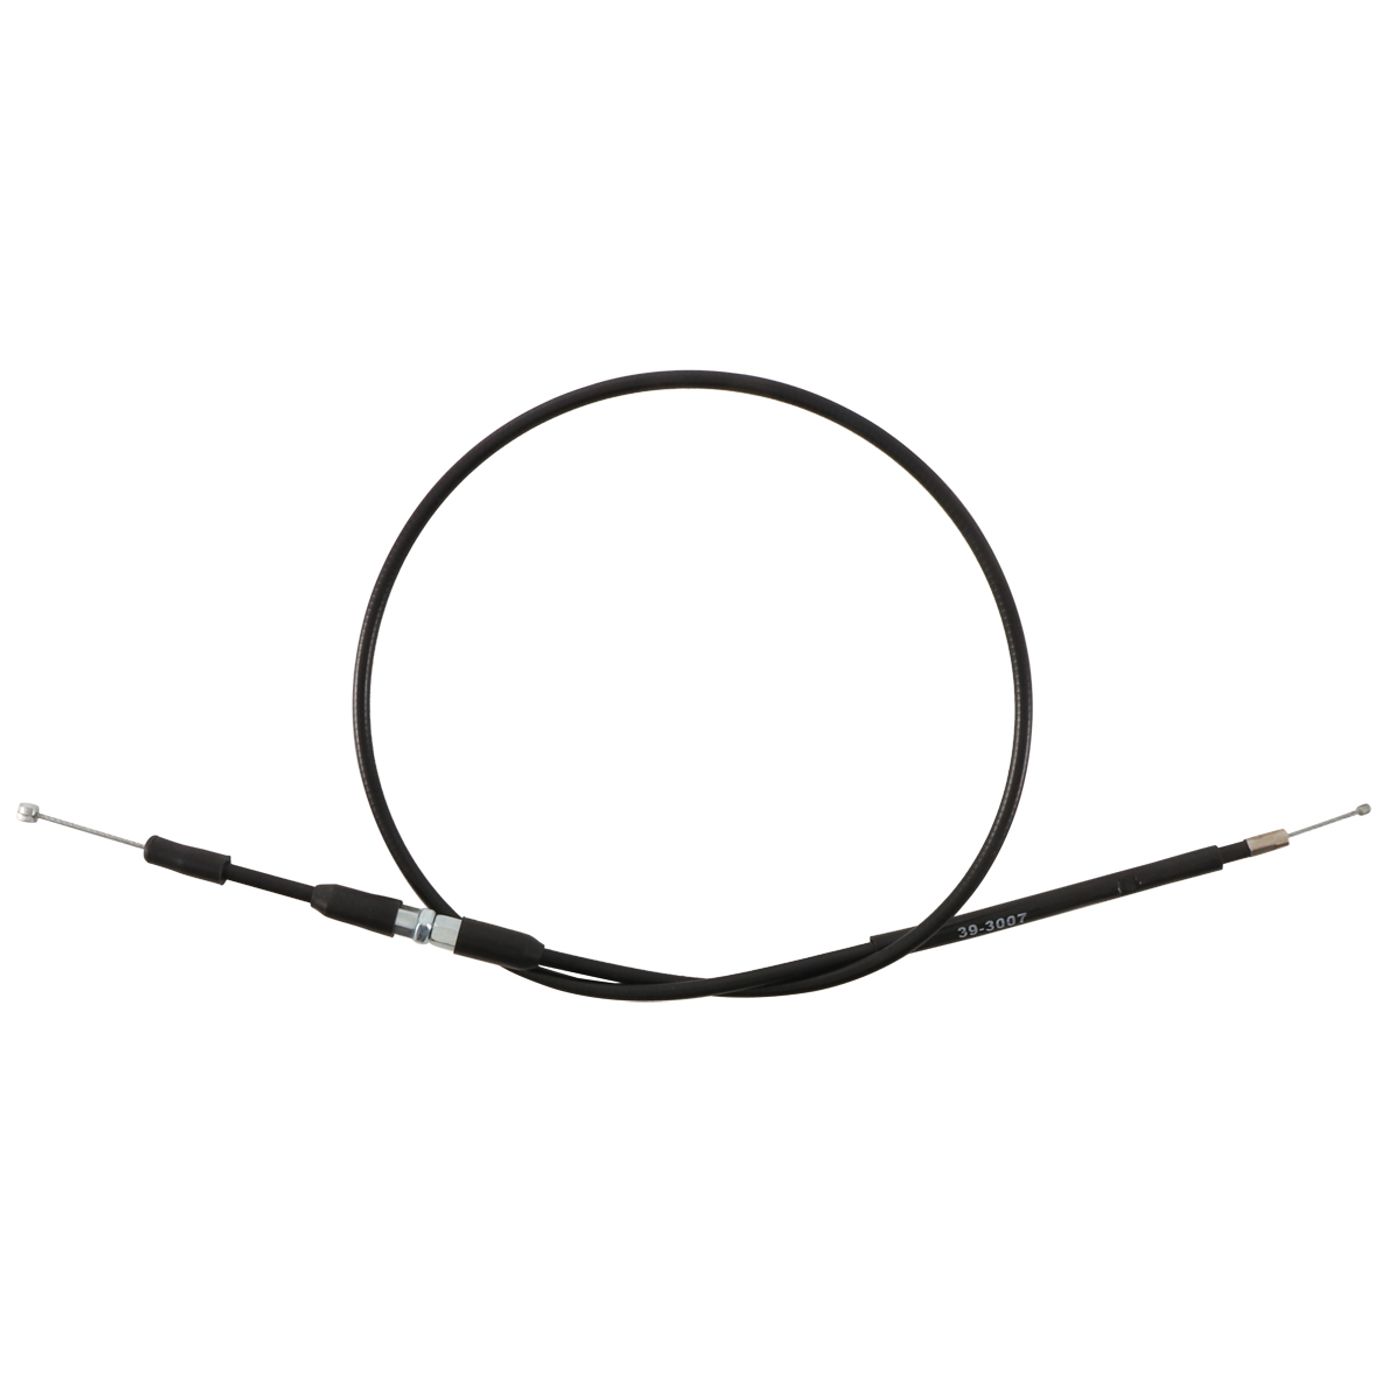 Wrp Clutch Cables - WRP453006 image